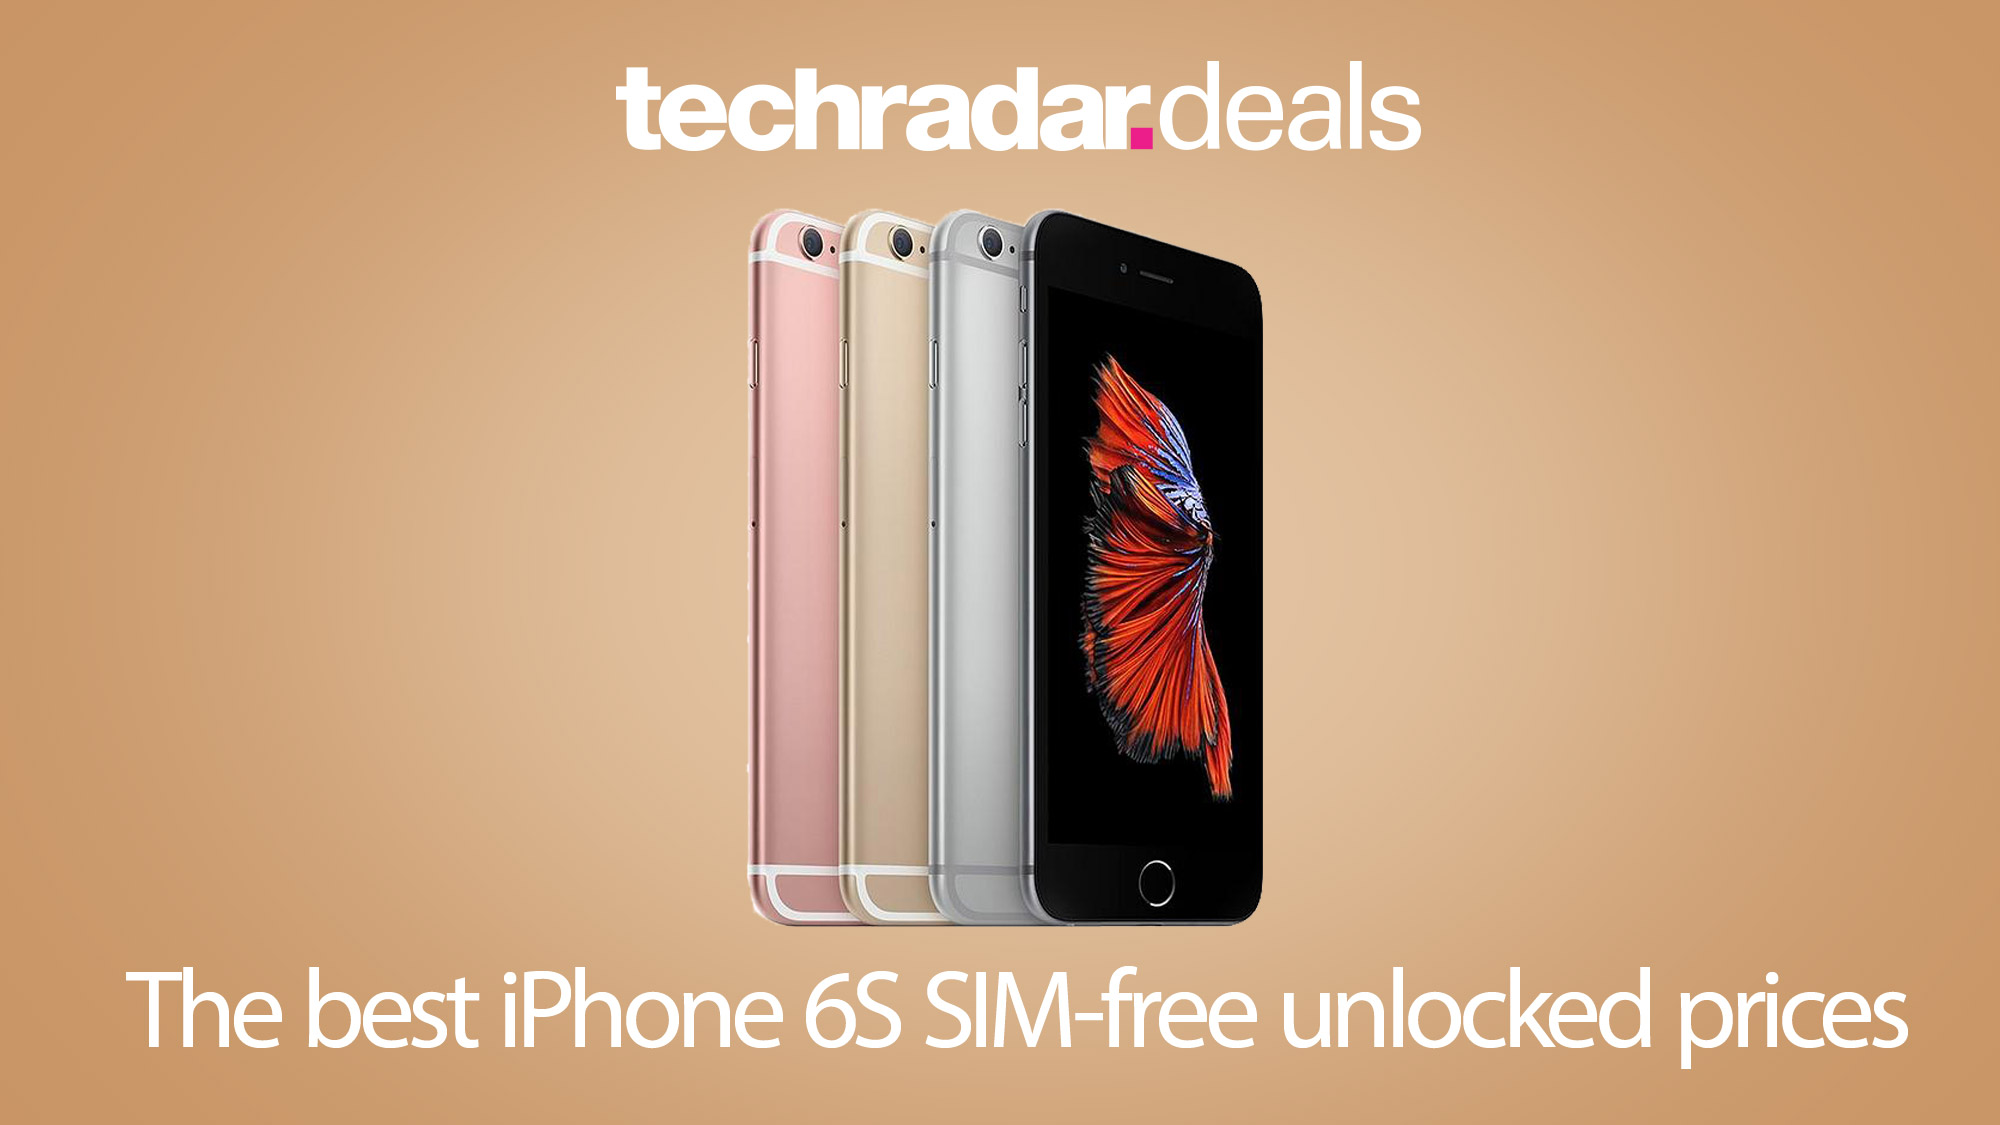 The cheapest iPhone 6S price for unlocked SIM-free plans in 